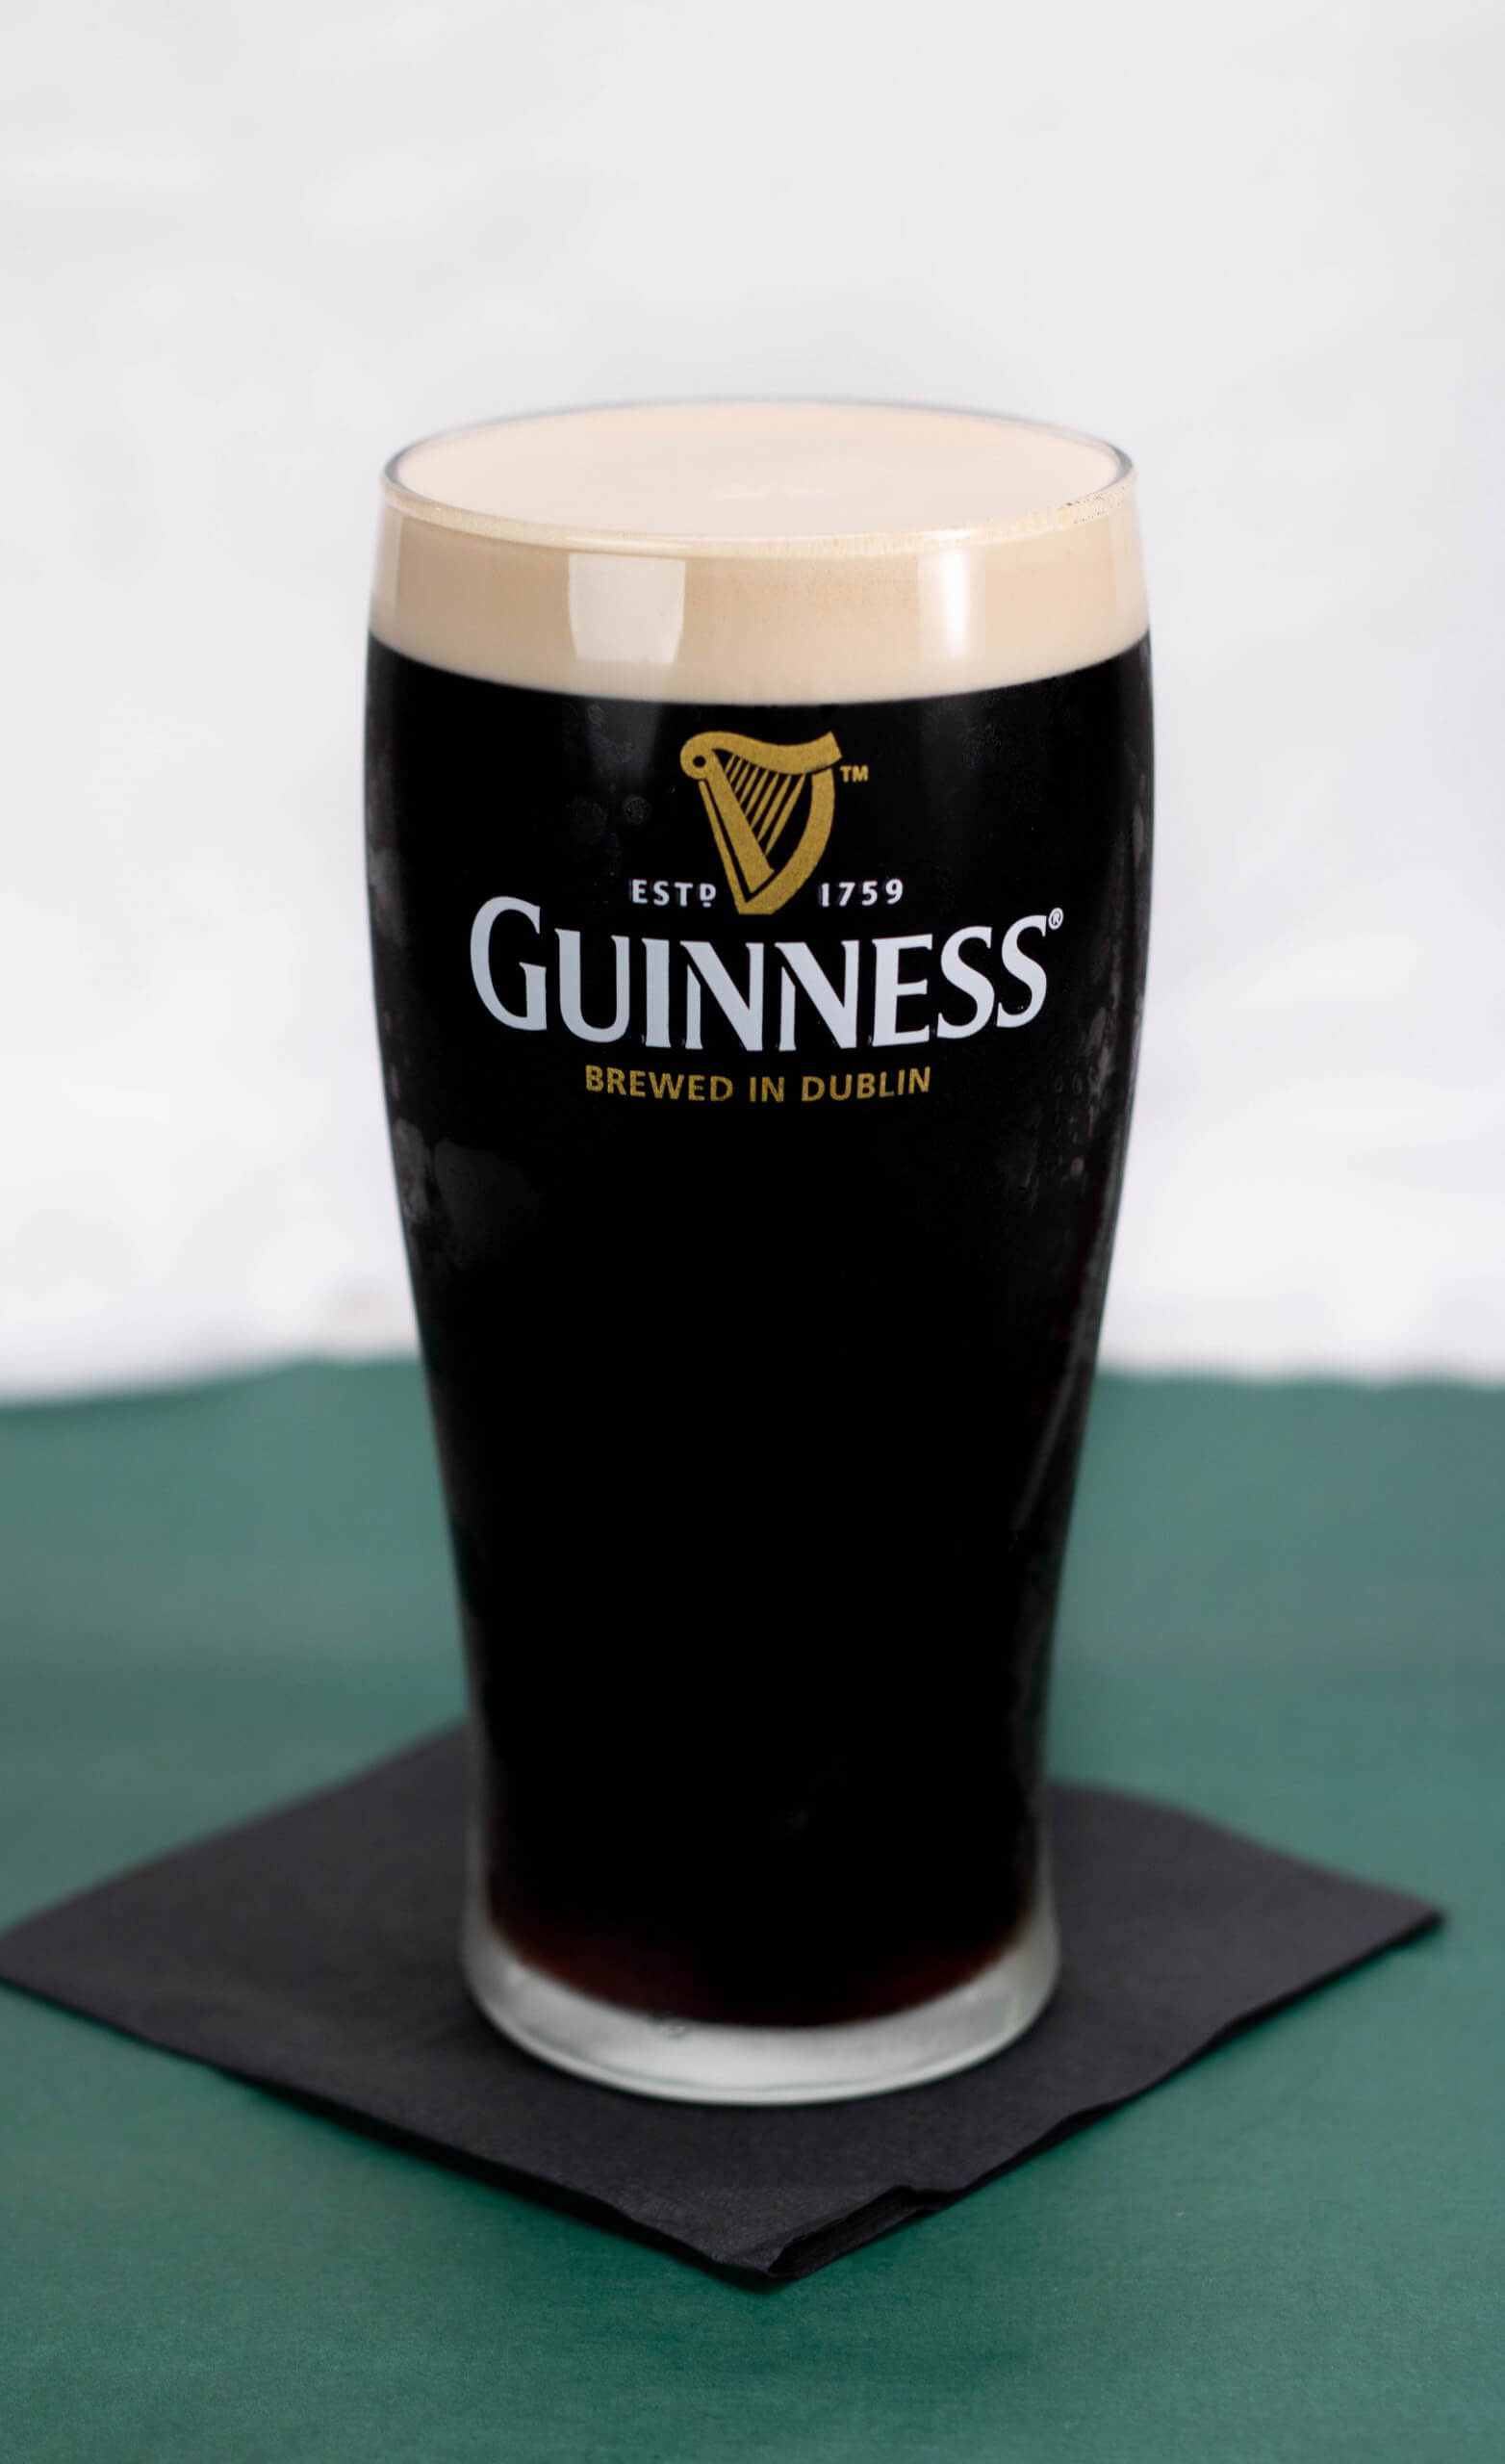 Guinness glass filled with beer